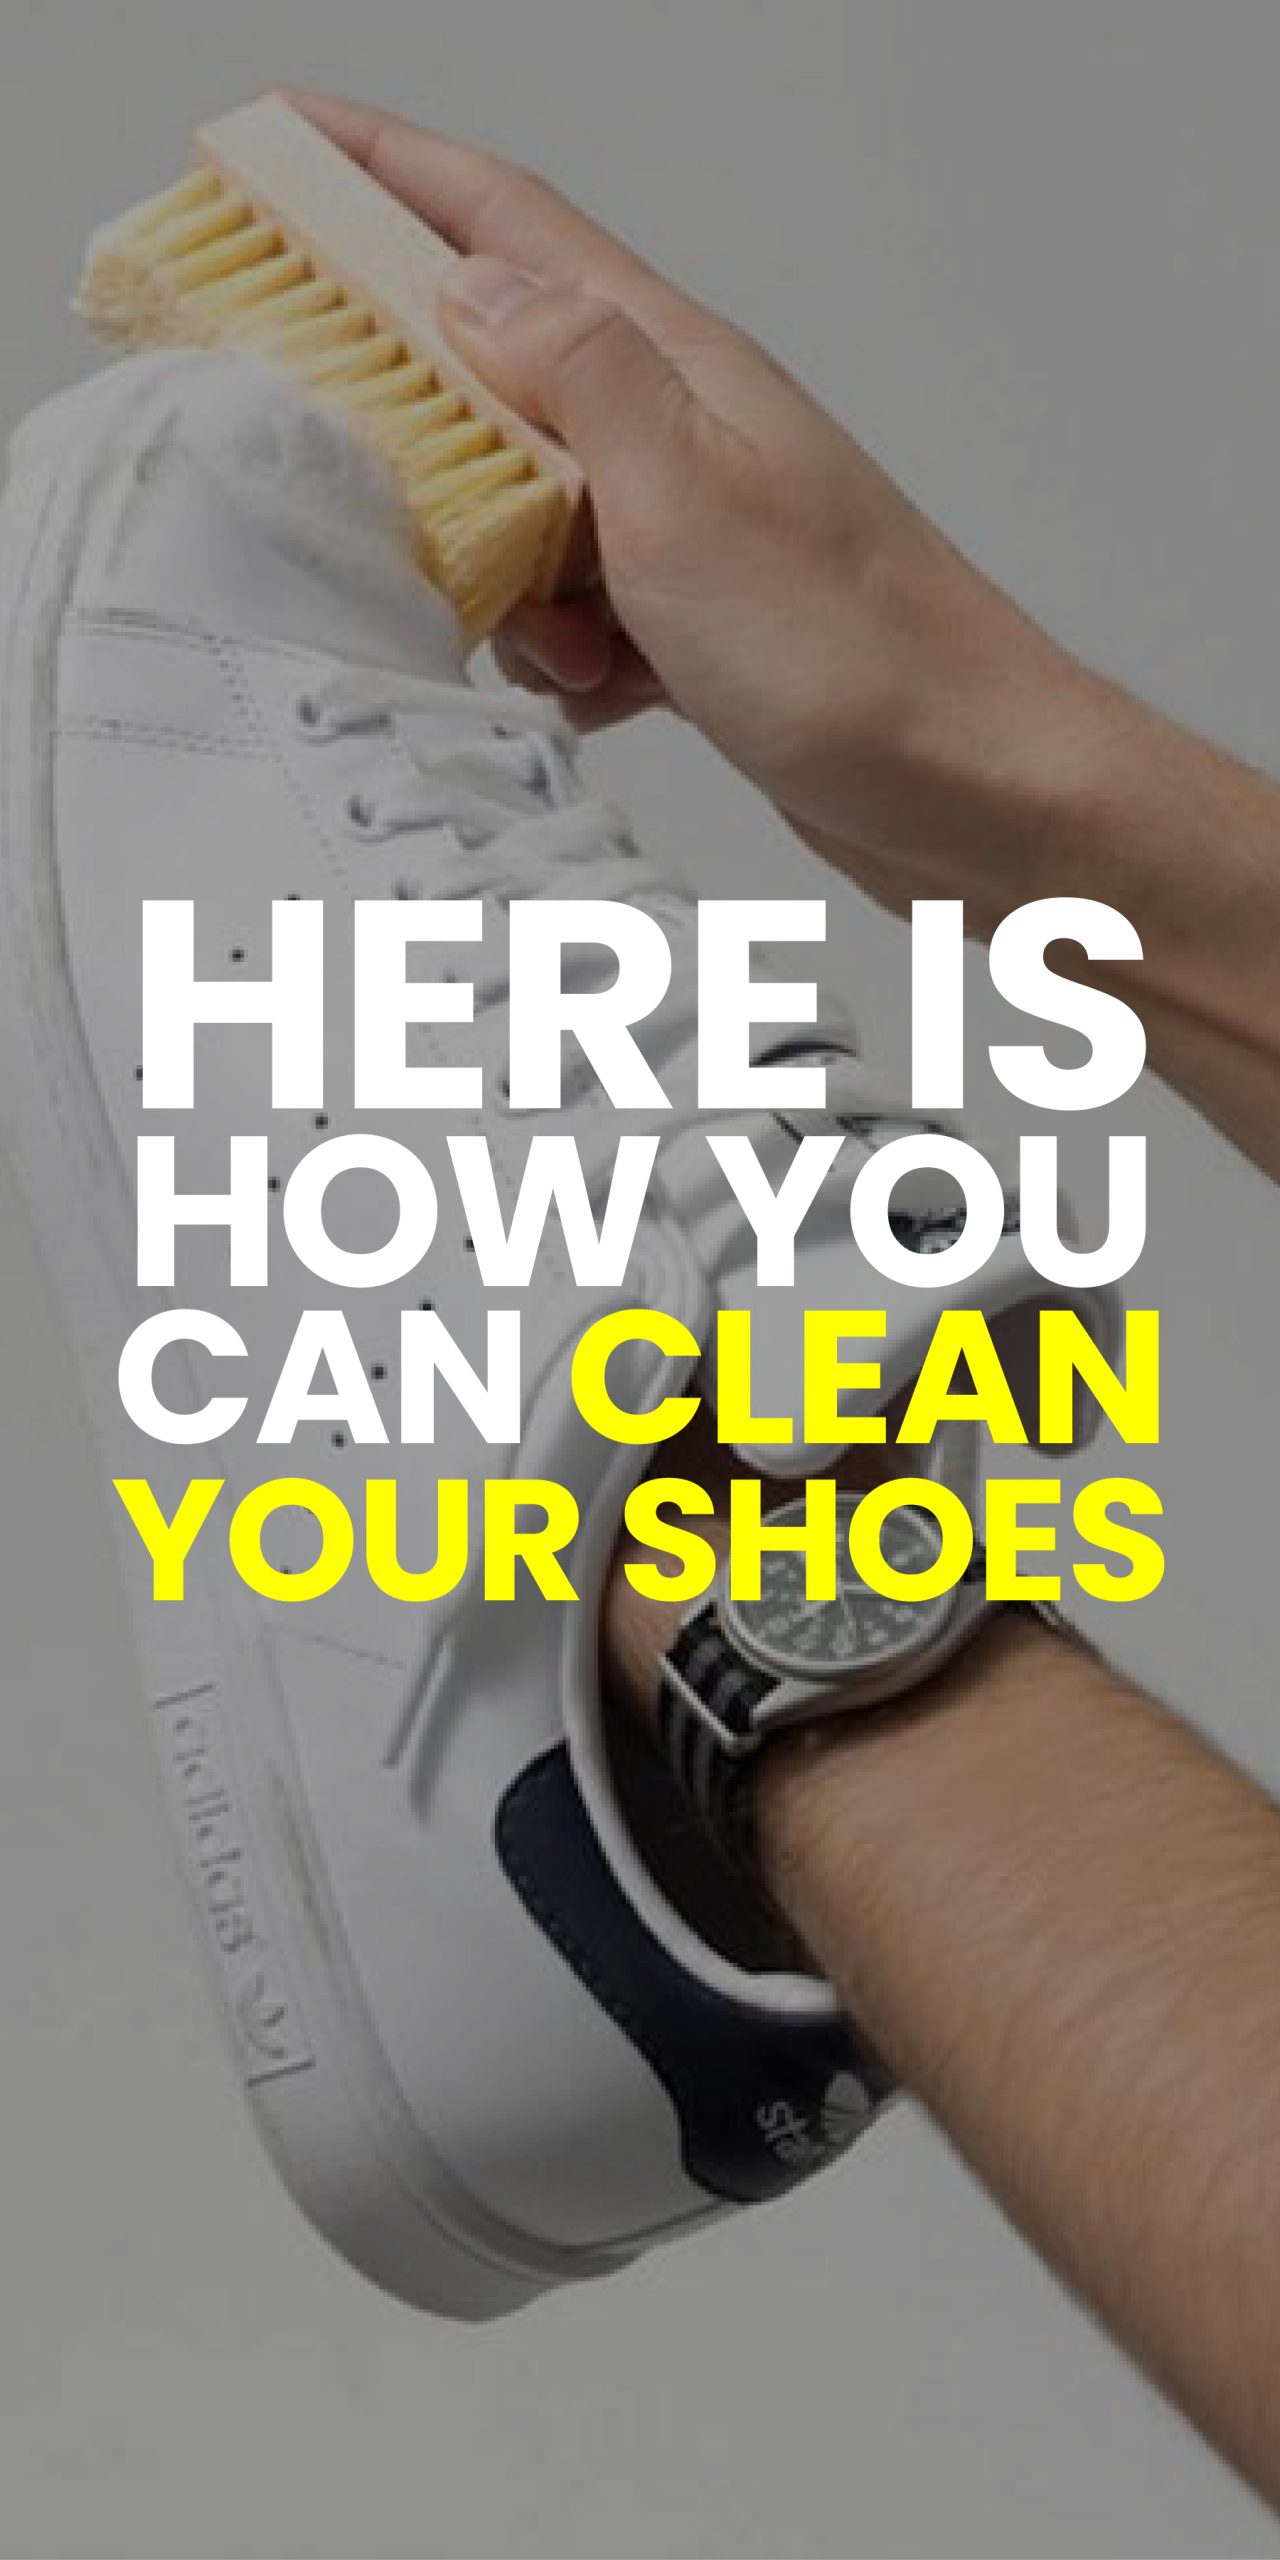 HERE IS HOW YOU CLEAN YOUR SHOES